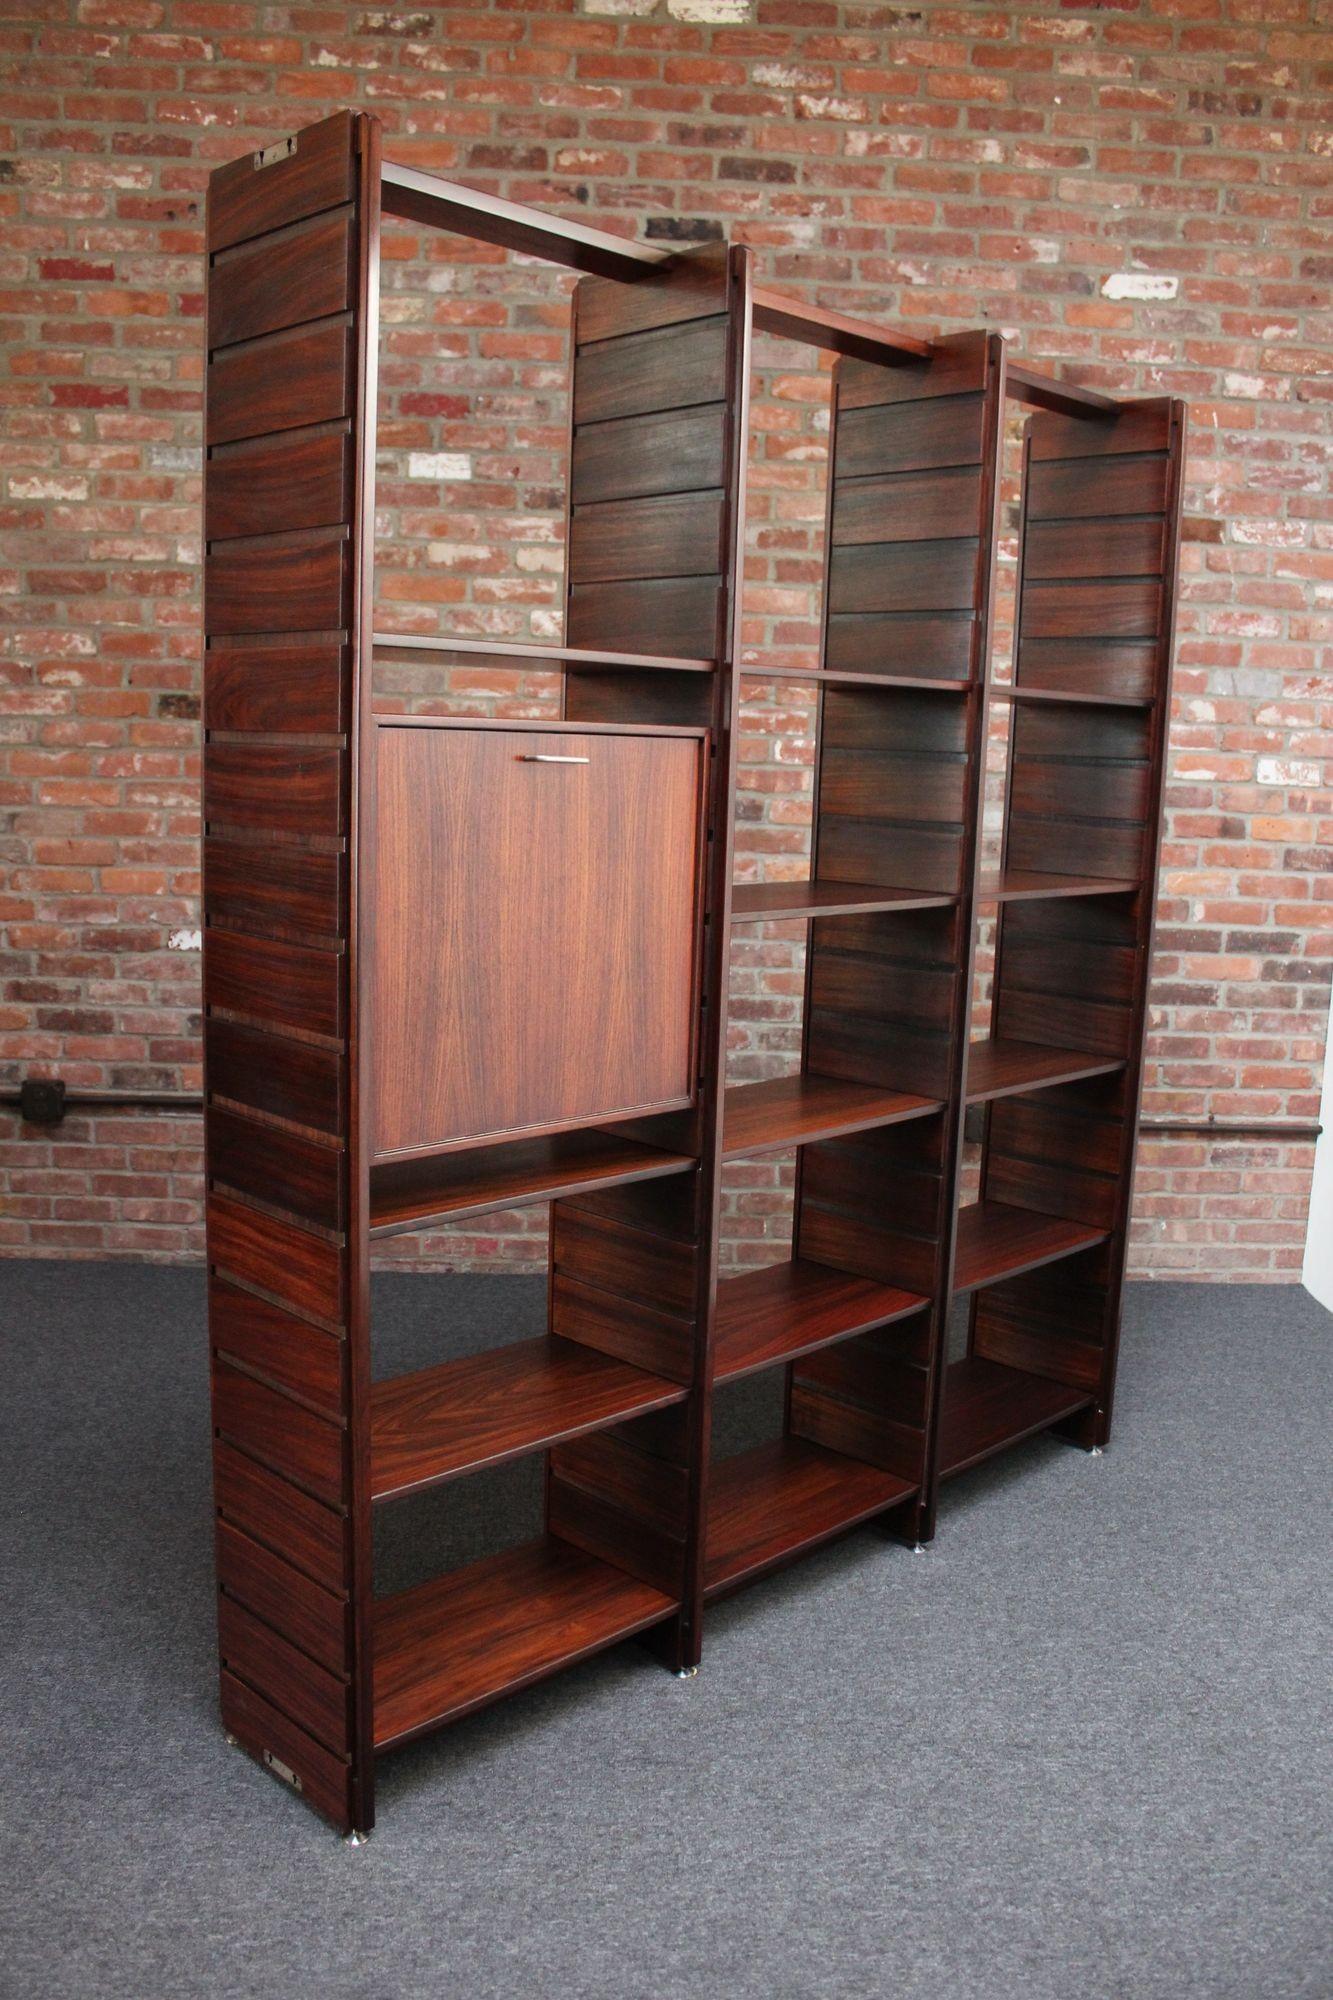 Mid-20th Century Italian Modern Rosewood Wall Unit/Bookcase by Gianfranco Frattini for Bernini For Sale